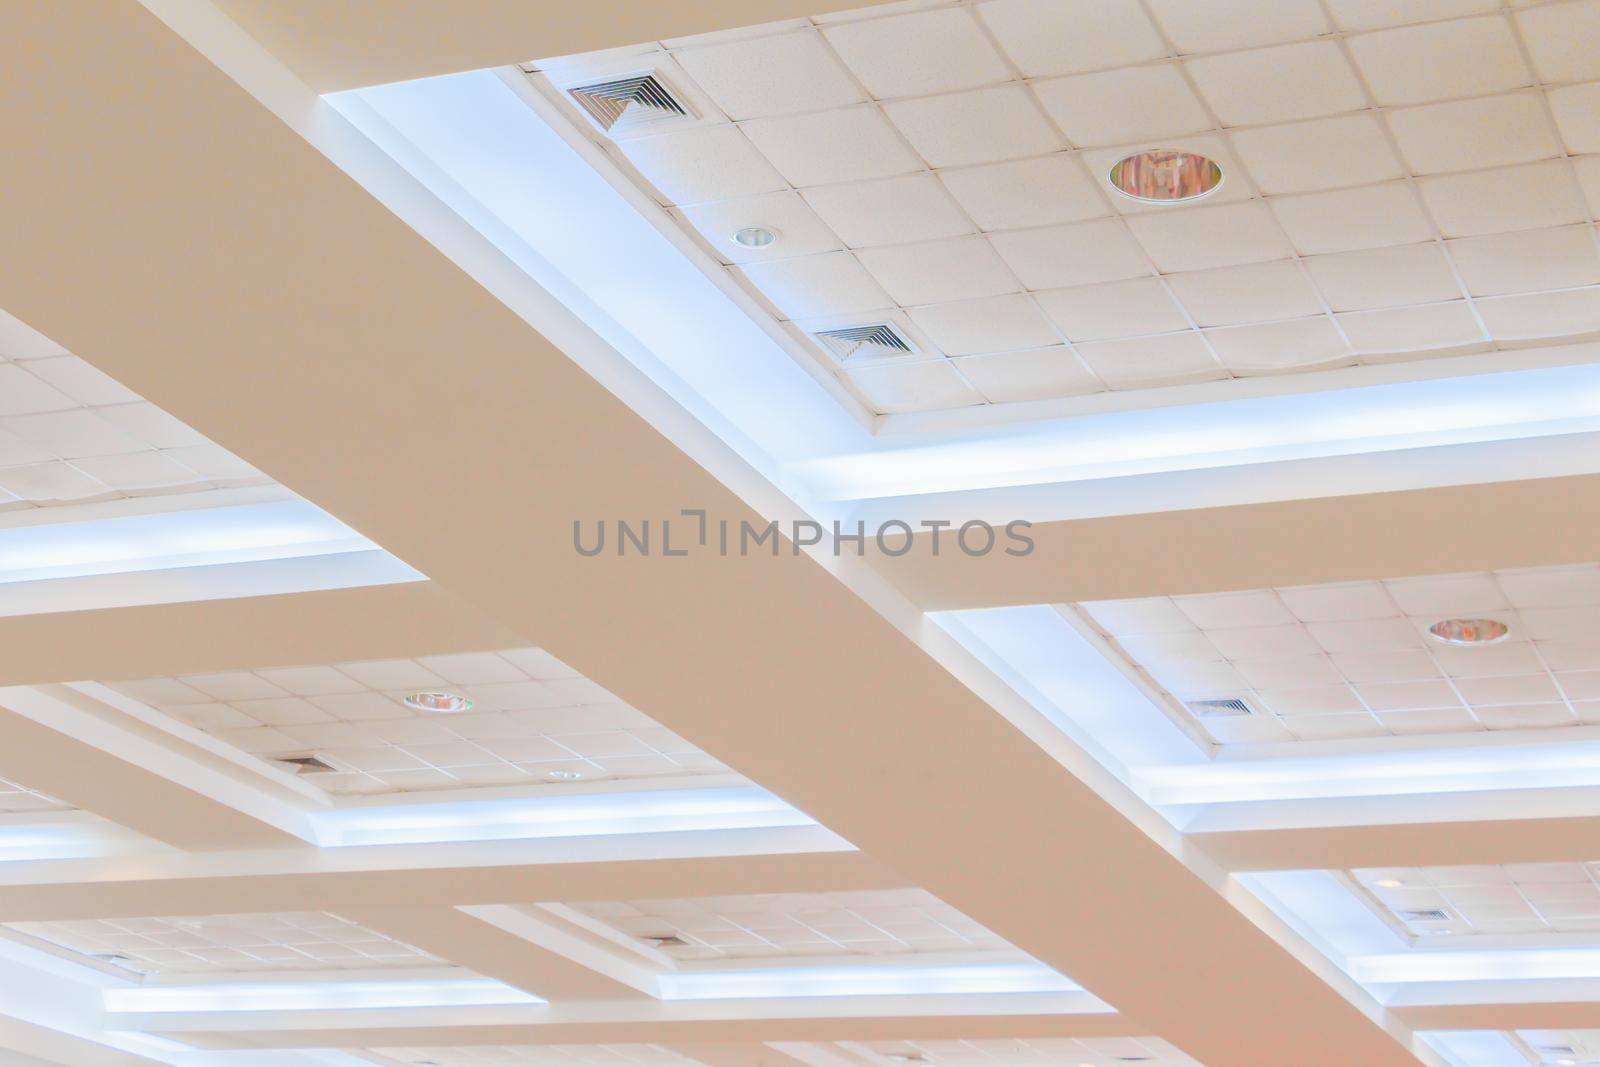 ceiling gypsum of business interior office building and light neon. style monochrome with copy space add text by pramot